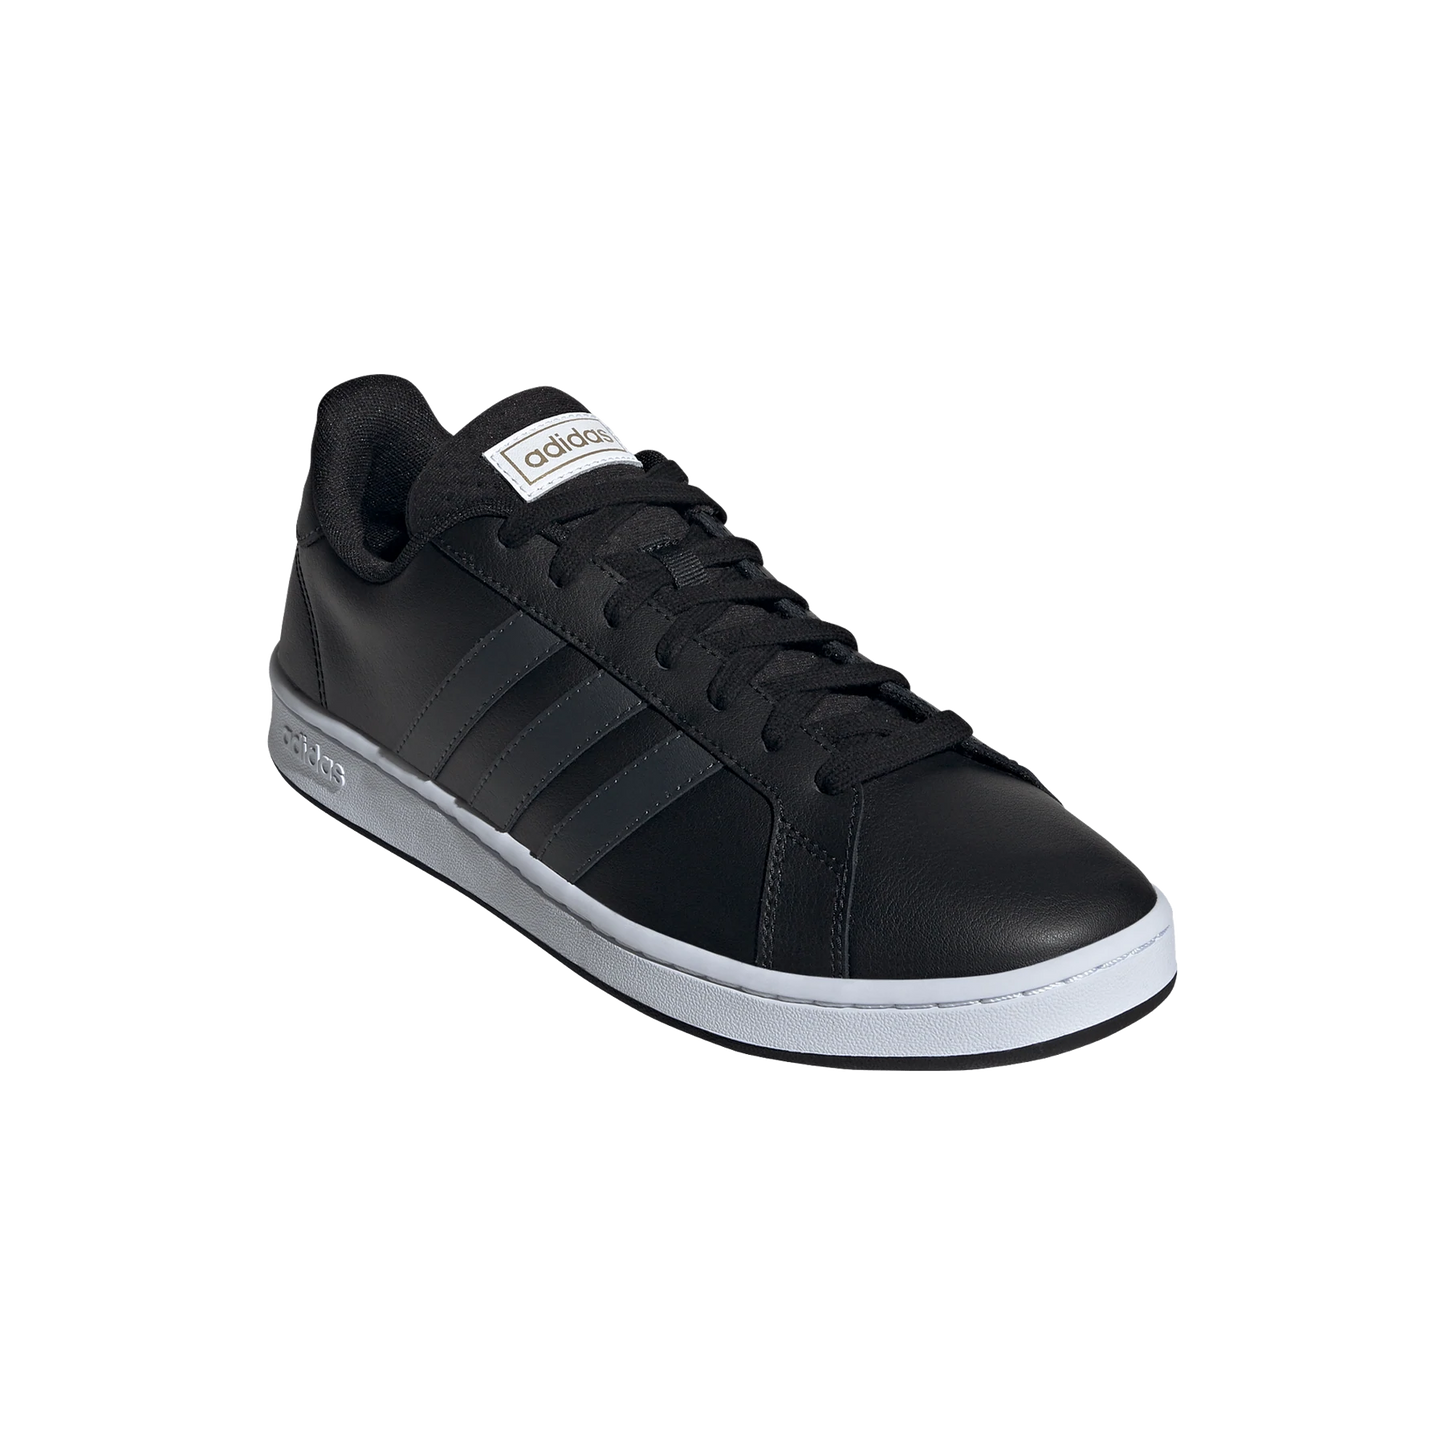 Adidas Unisex Grand Court Black / Carbon / MaGold (GY3623) - GY - R2L13